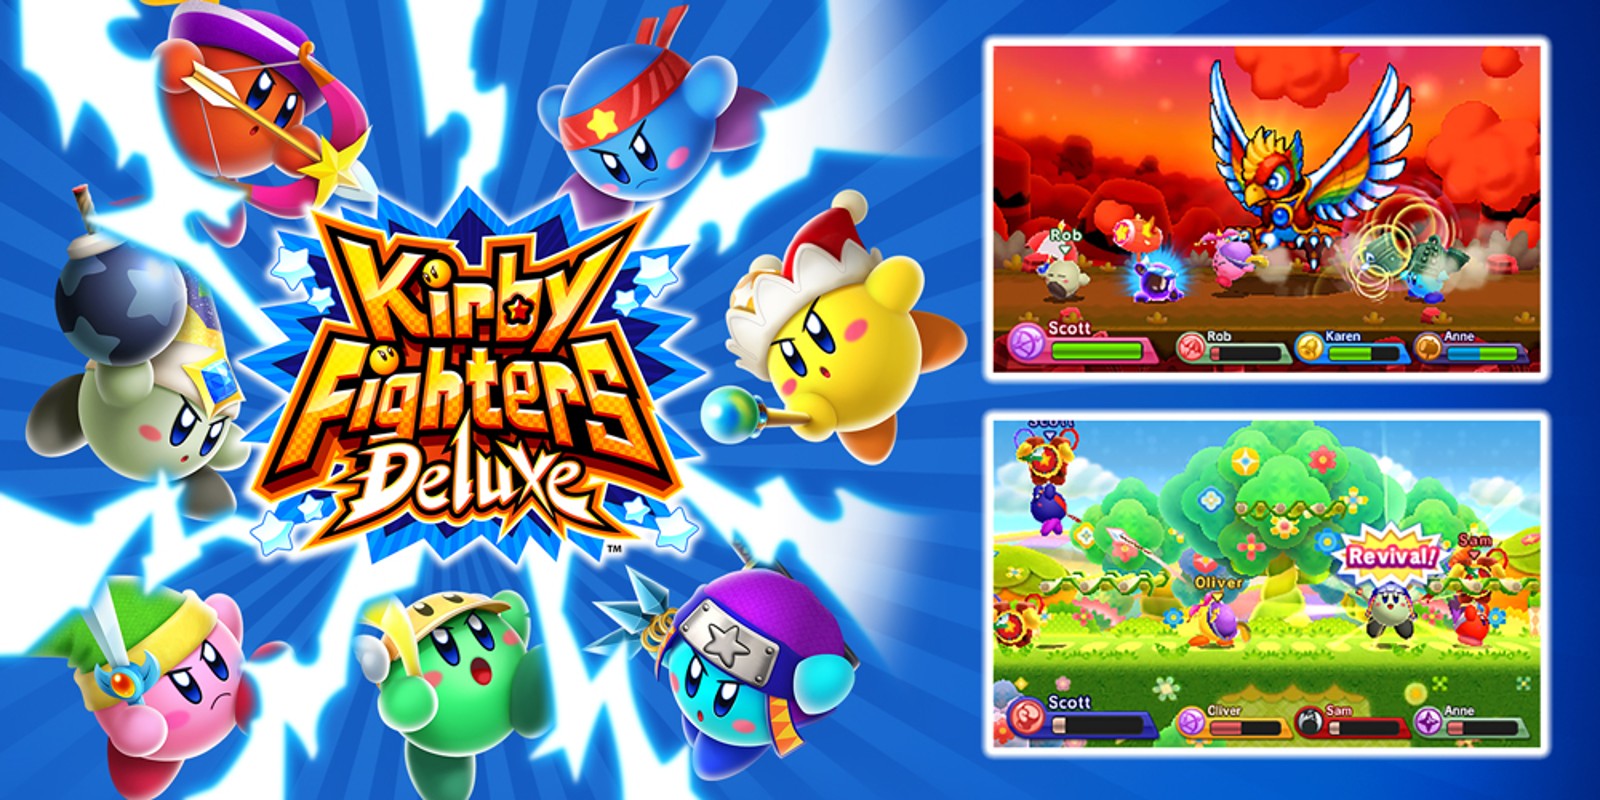 Kirby Fighters Deluxe 09 23 20 1